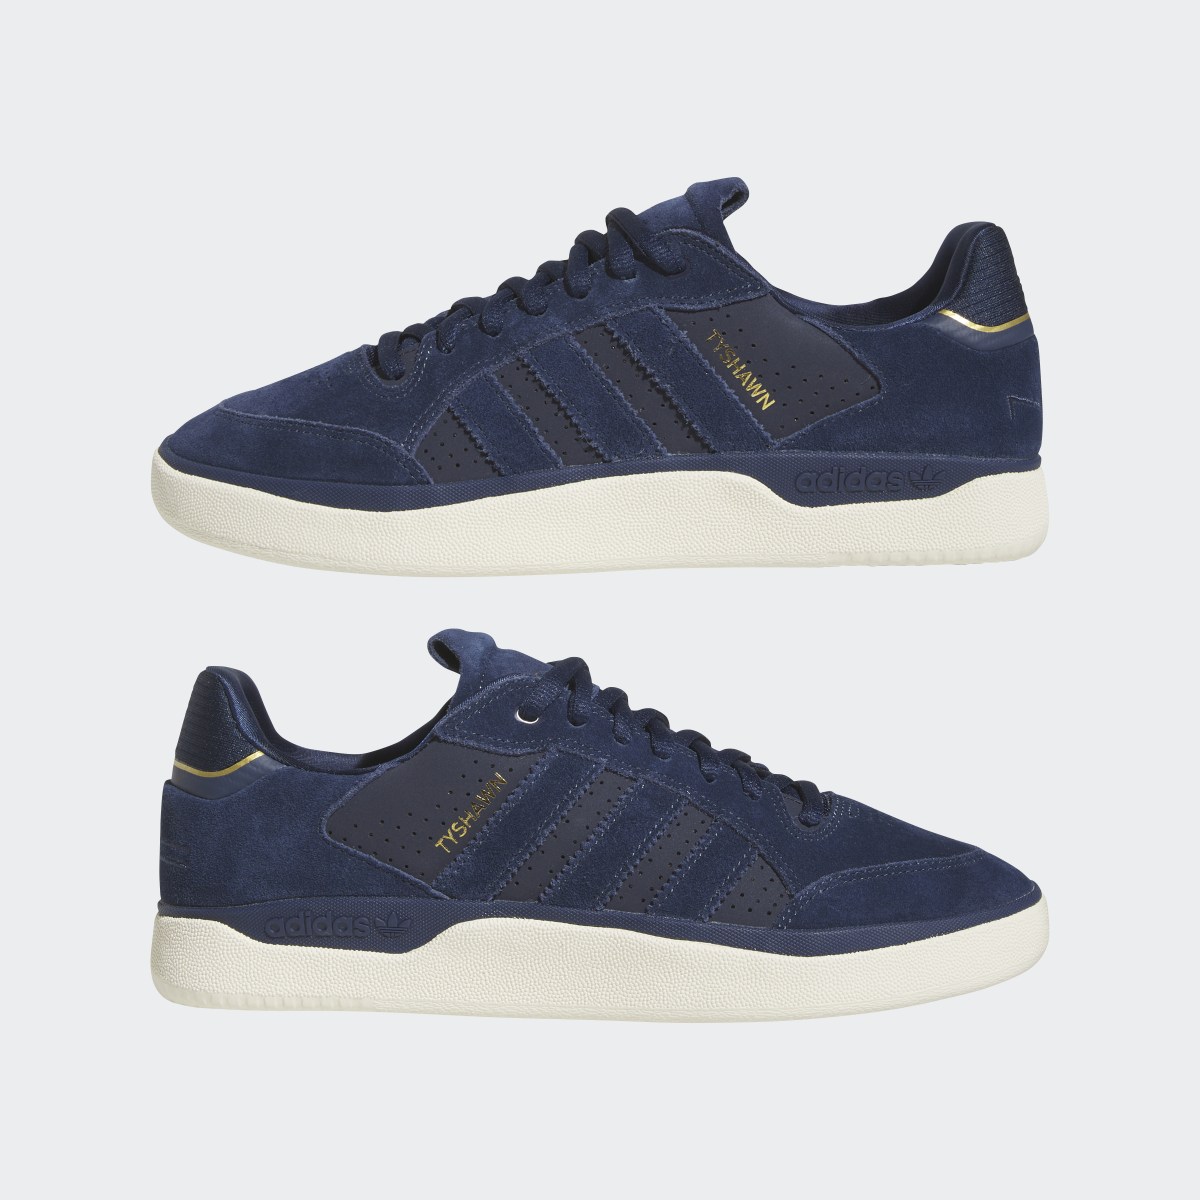 Adidas Tyshawn Low Shoes. 8